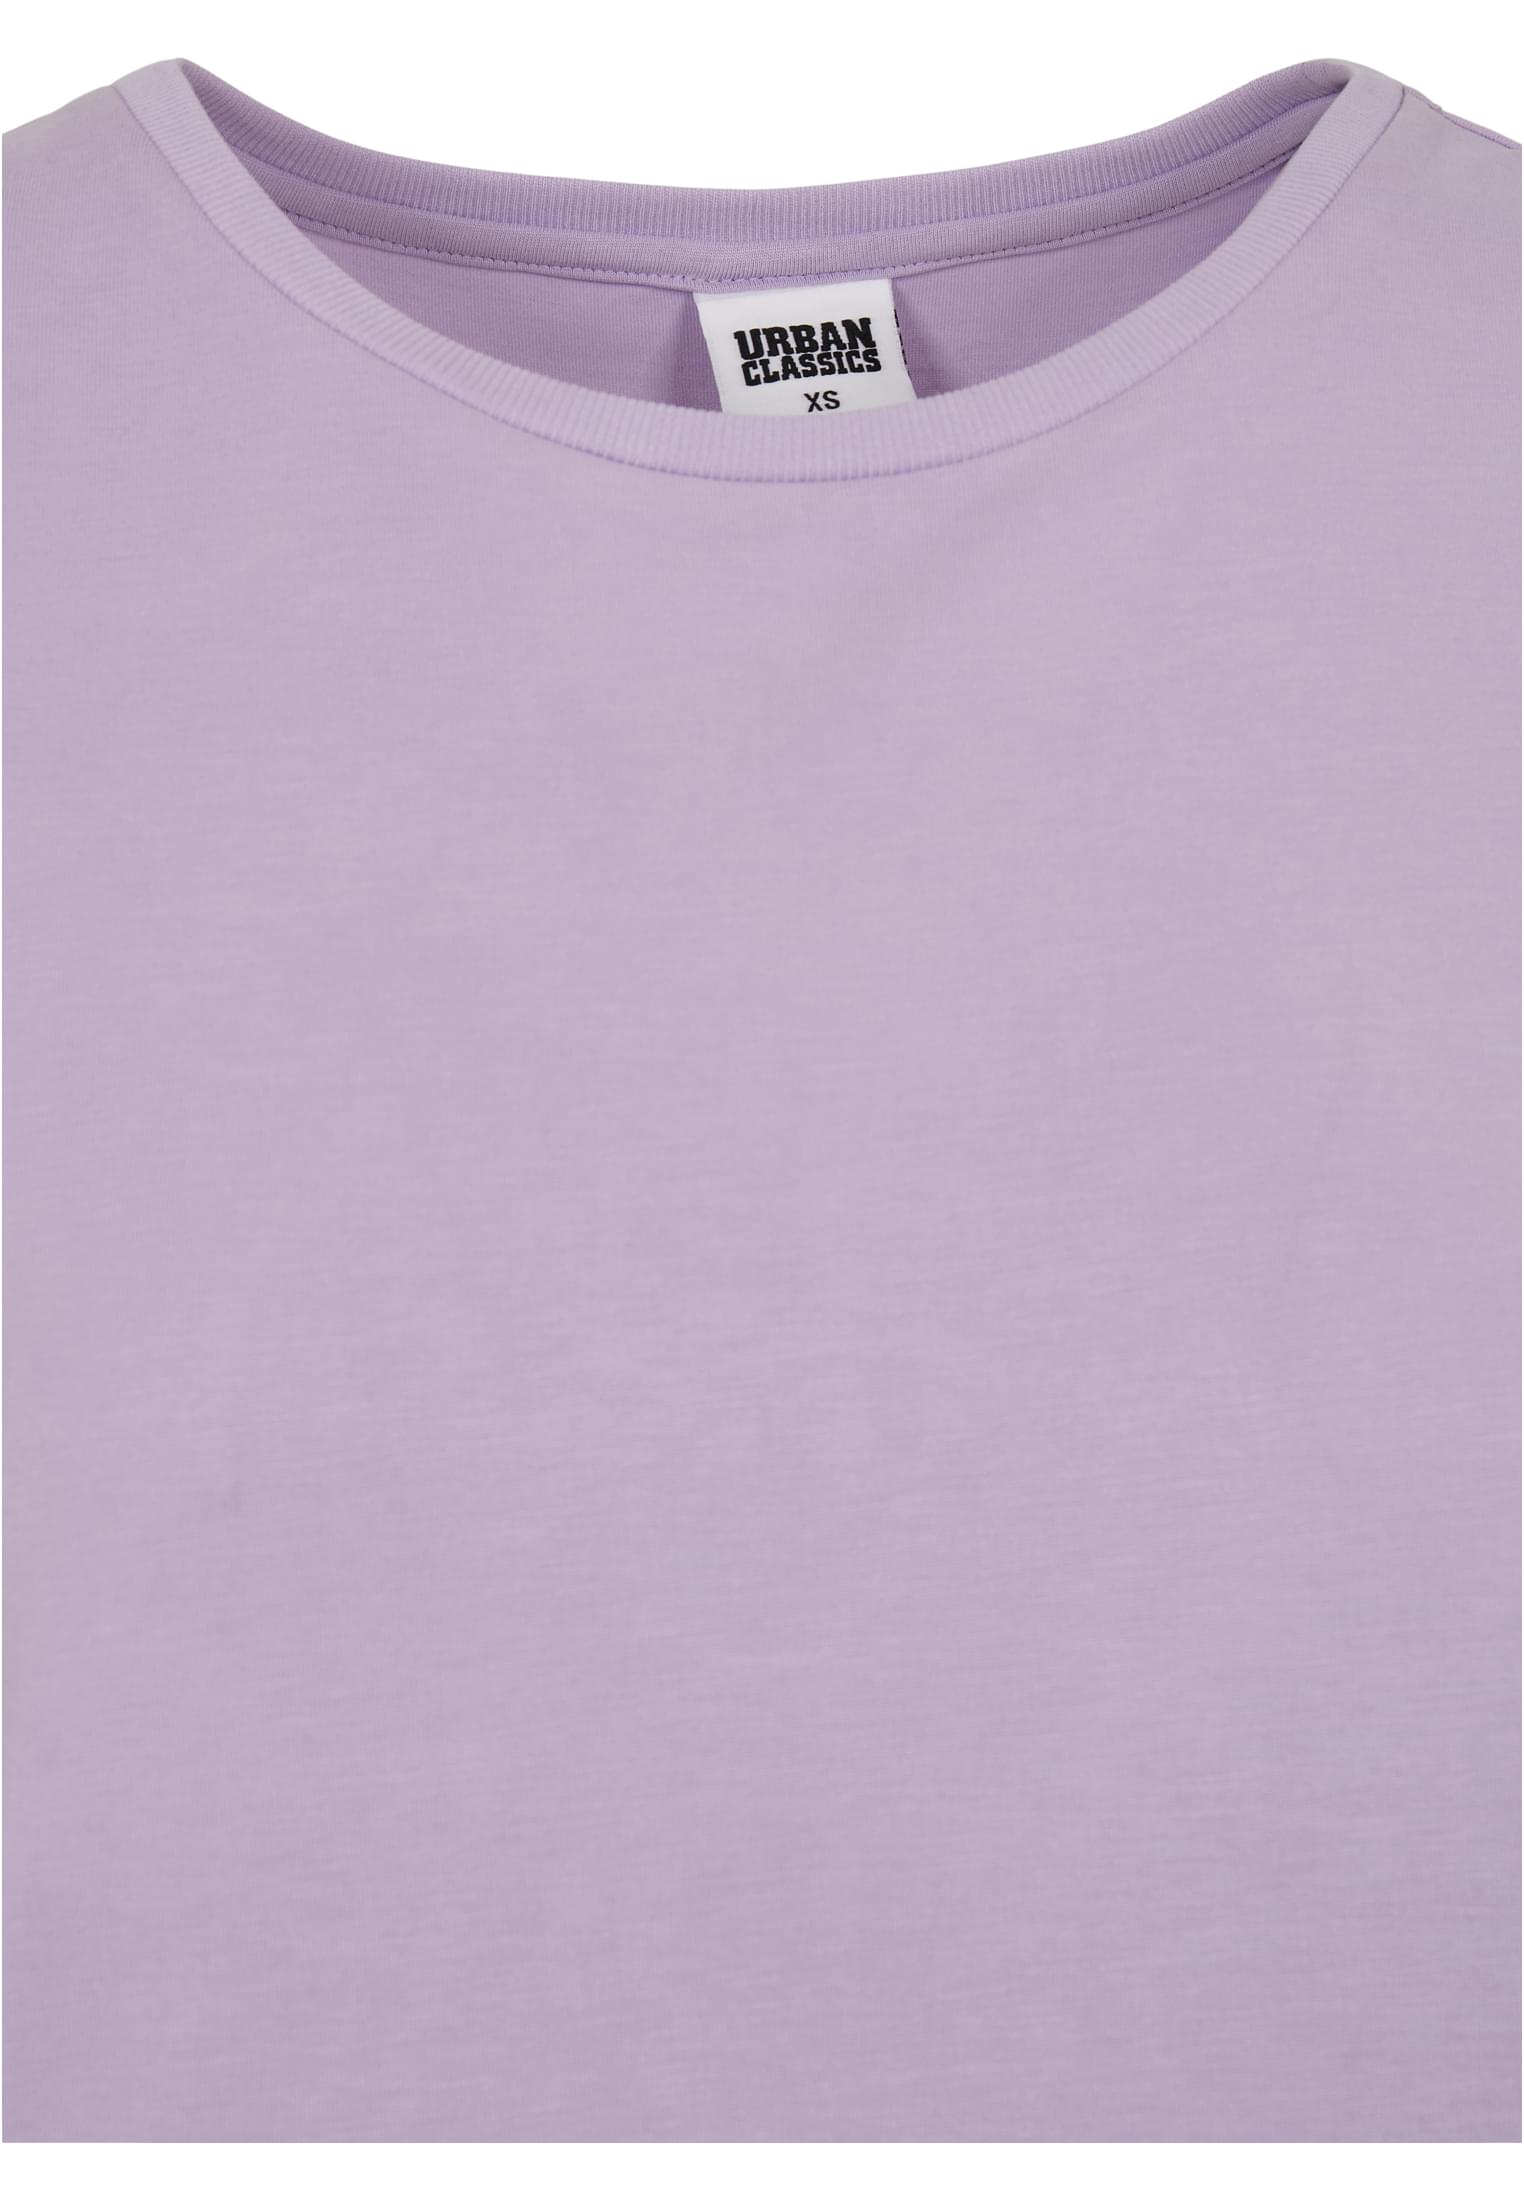 Frauen Ladies Modal Extended Shoulder Tee in Farbe lilac